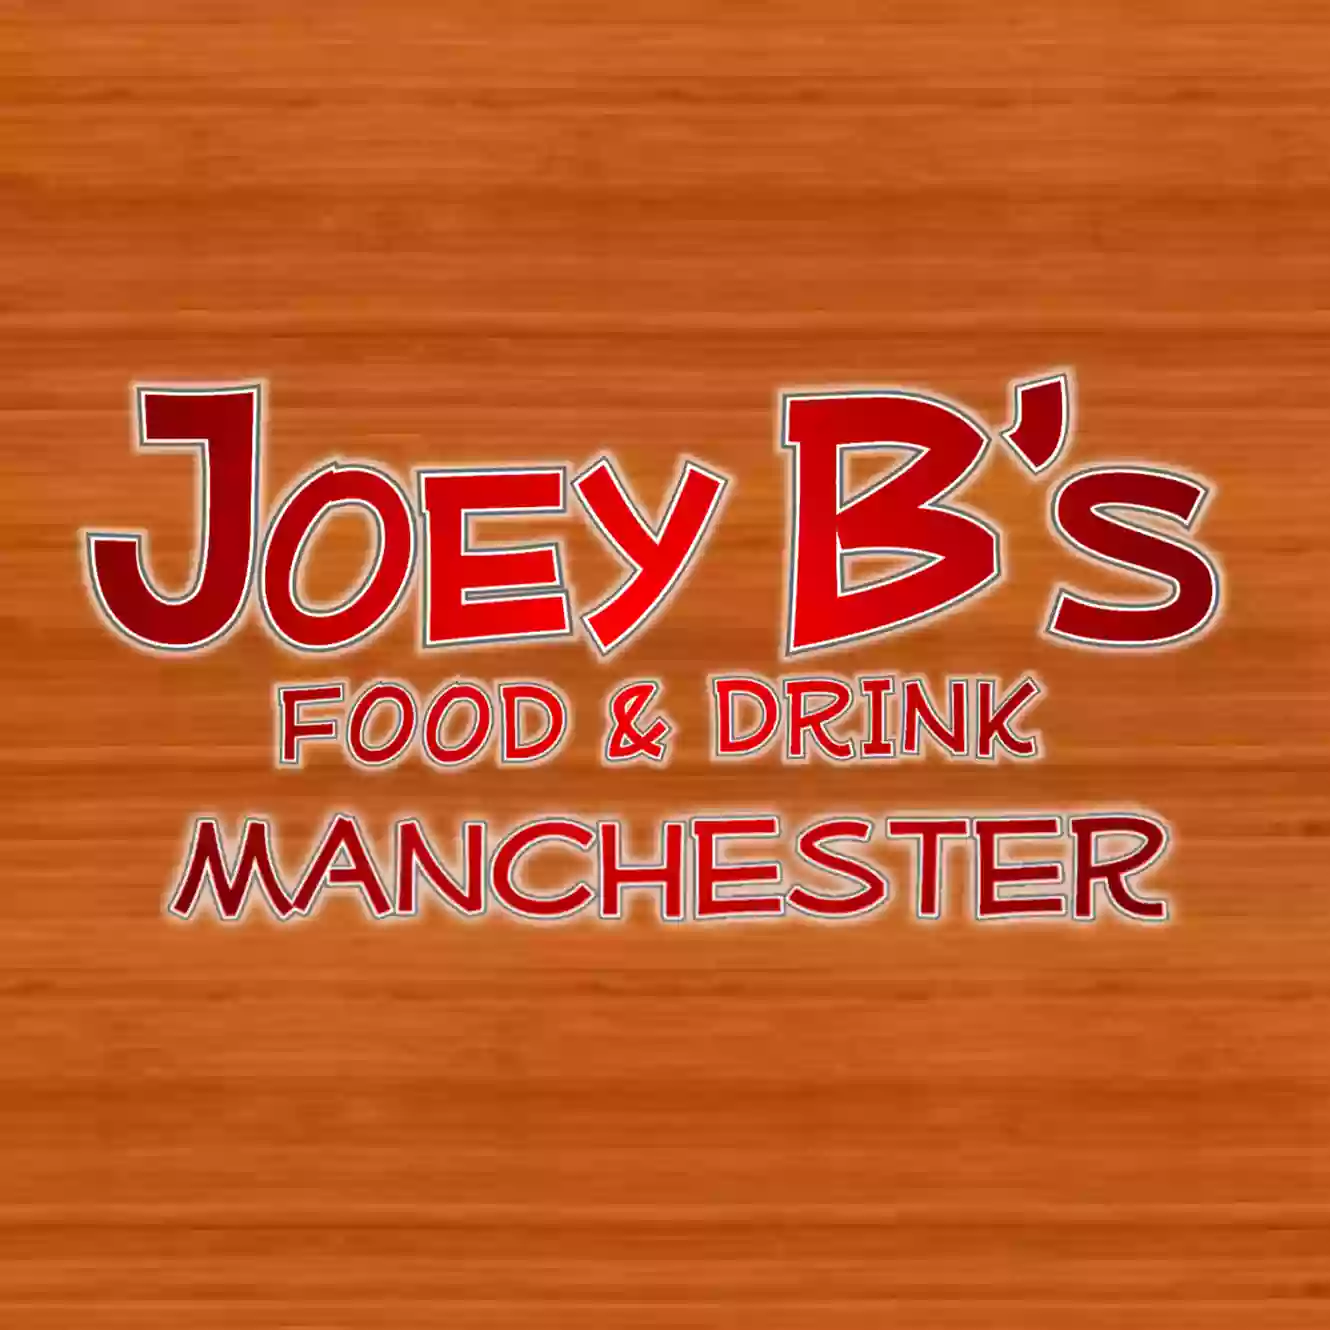 Joey B's Food & Drink Manchester